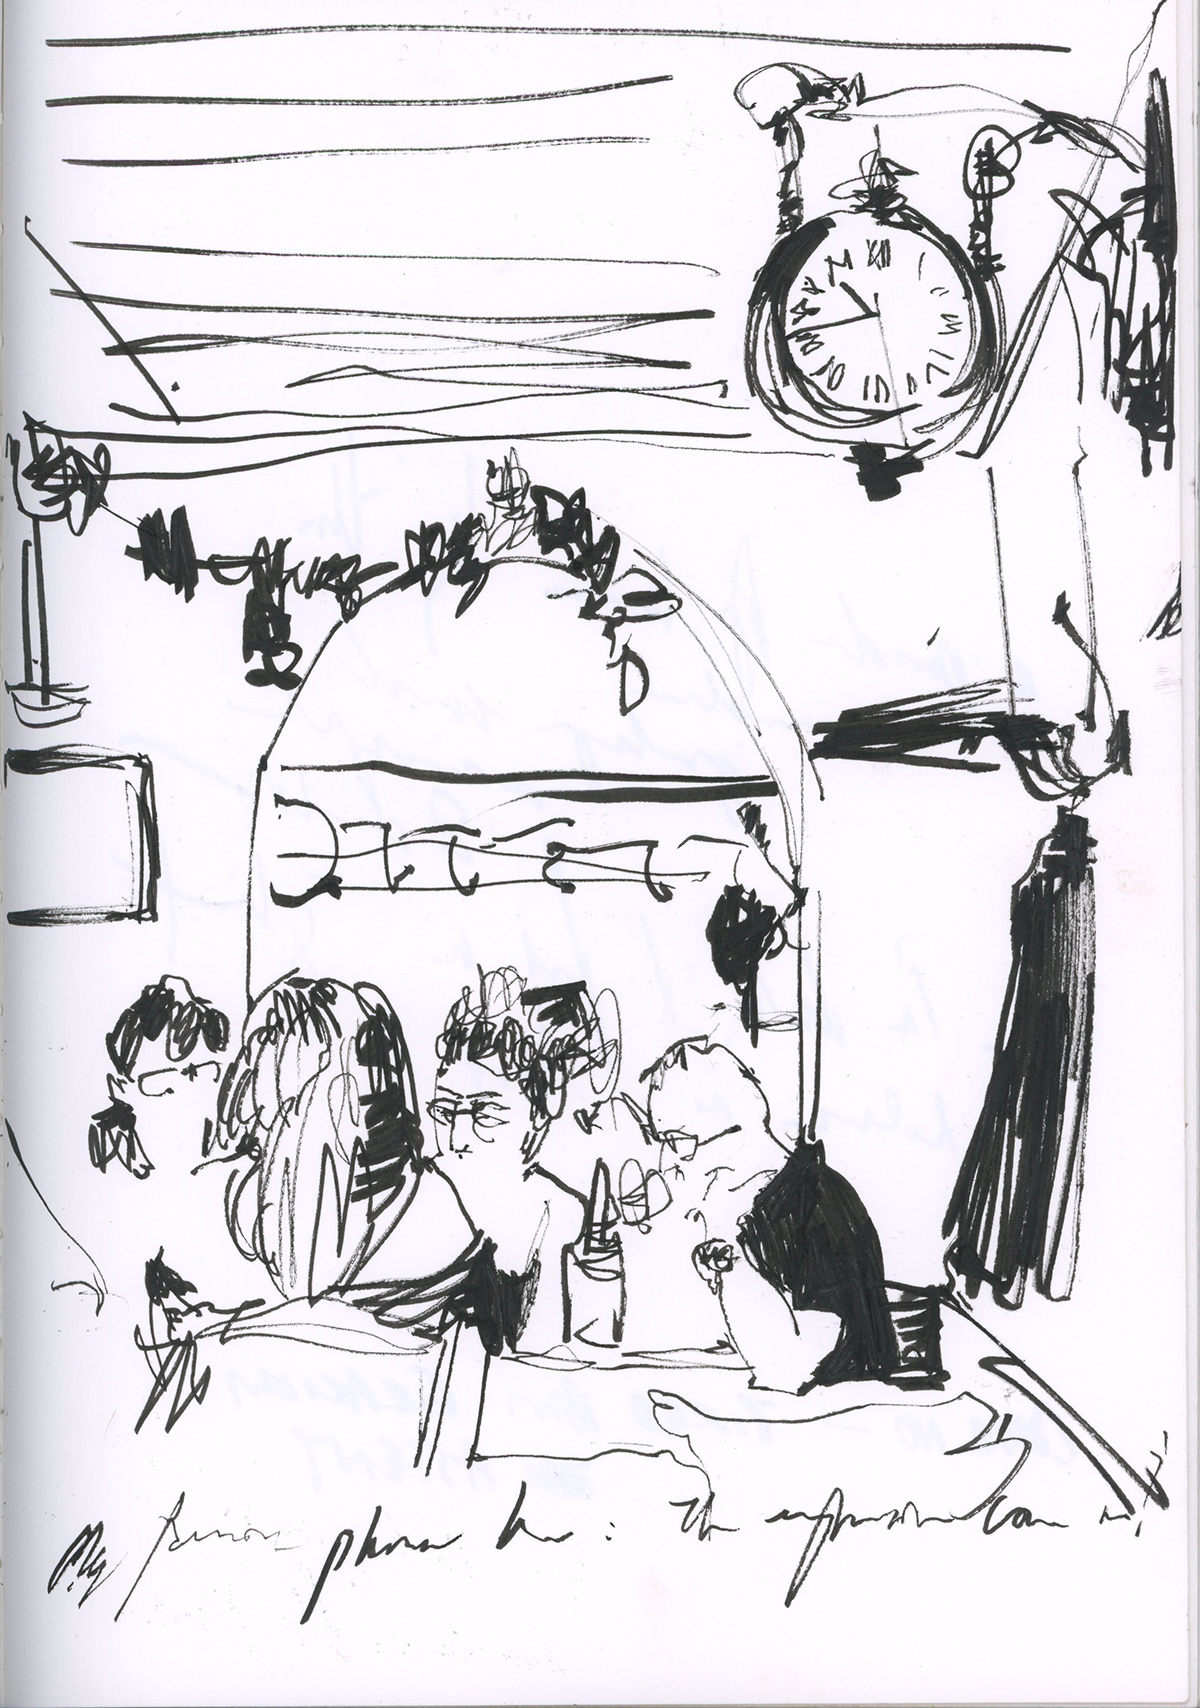 observation sketch Italy life